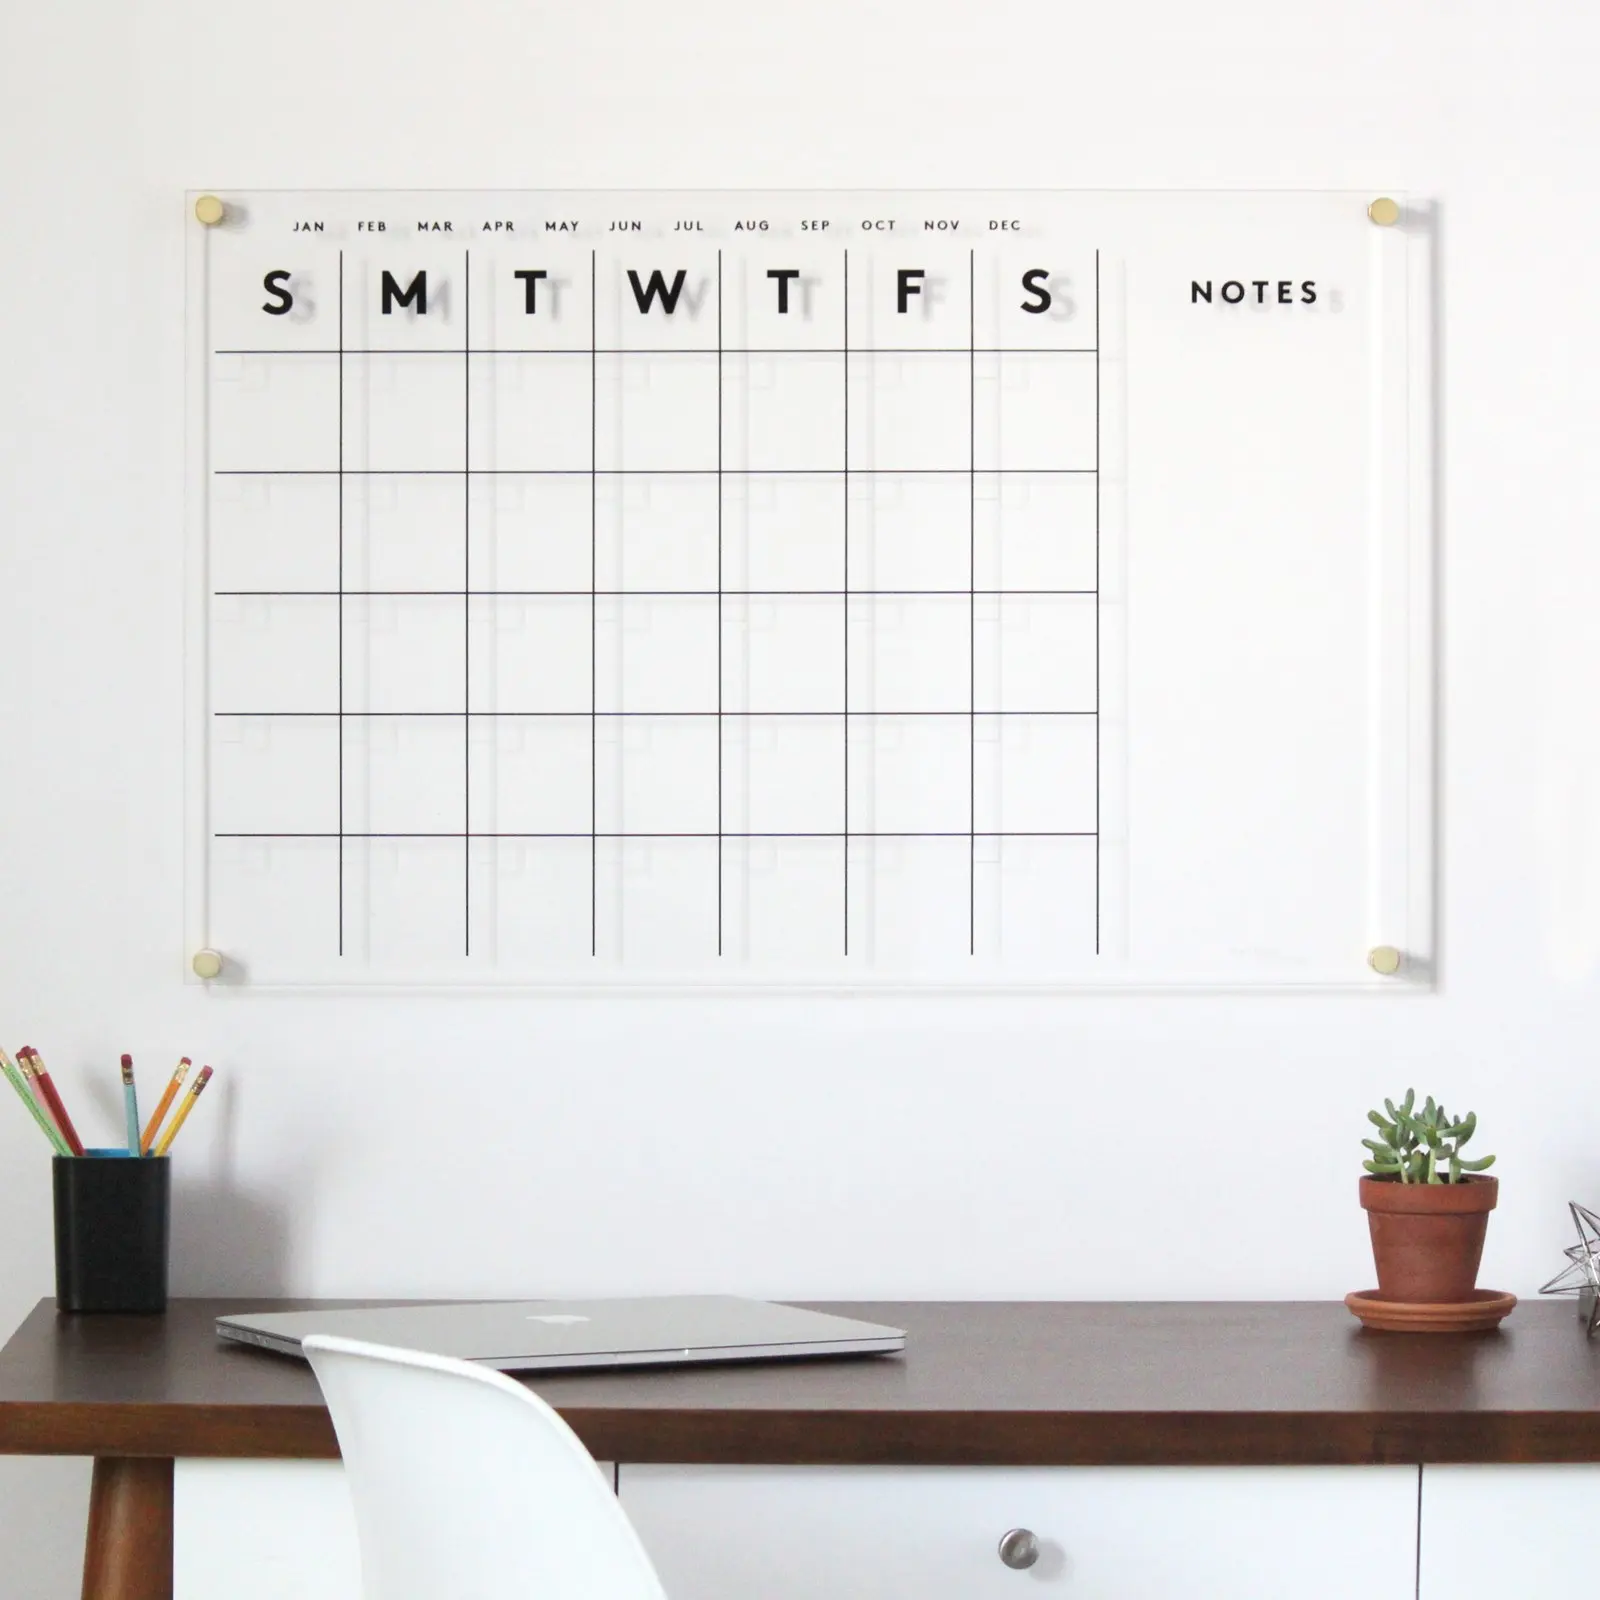 Simple Practical Hanging Wall Office Customized Acrylic Calendar Board